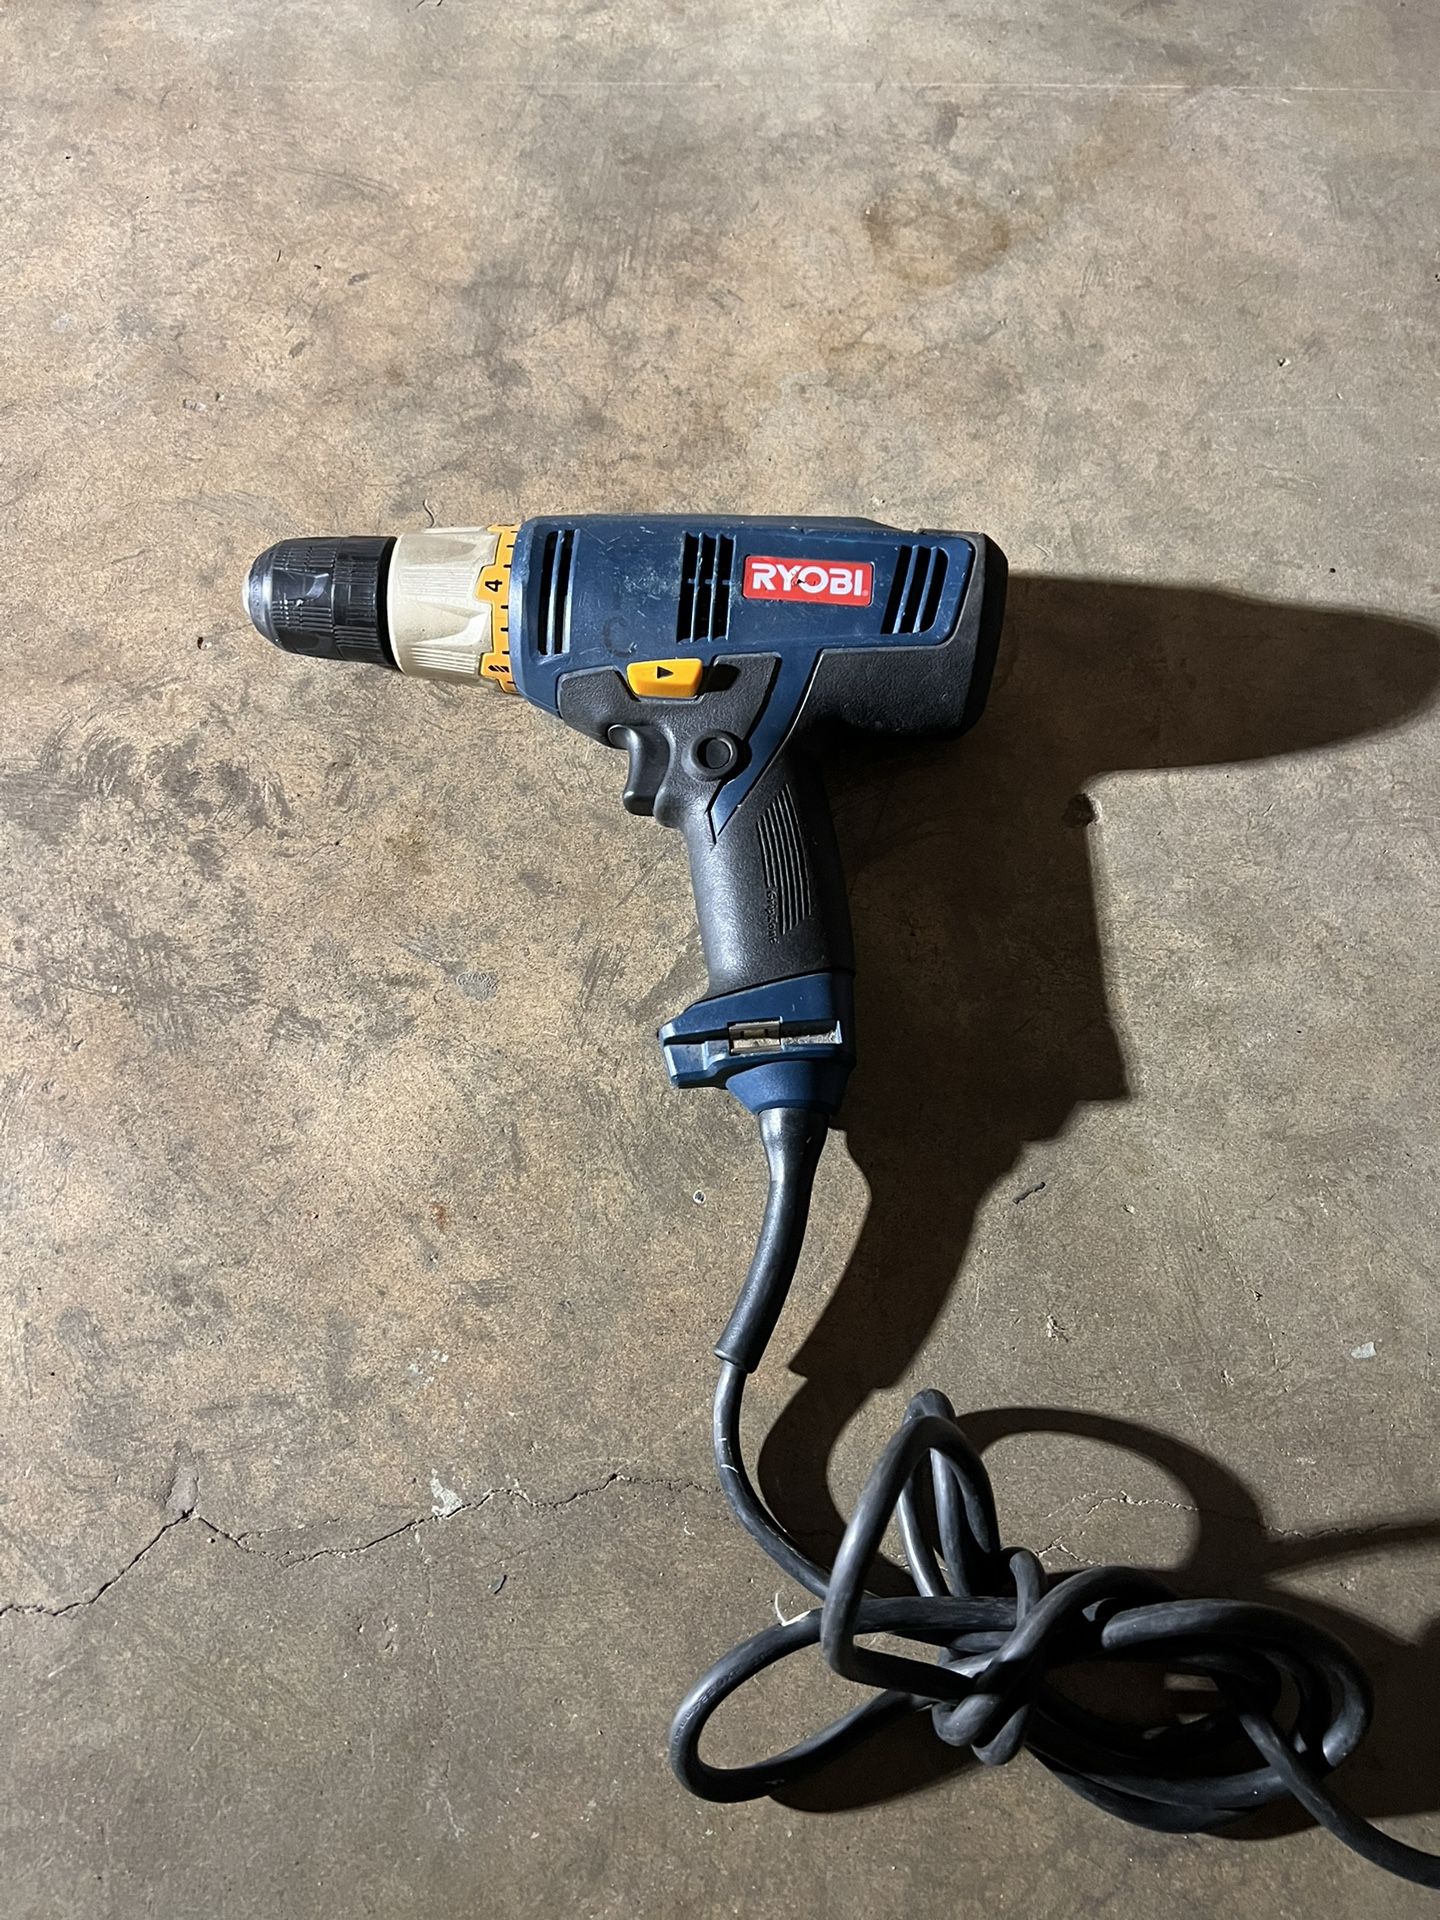 Electric Drill For Sale